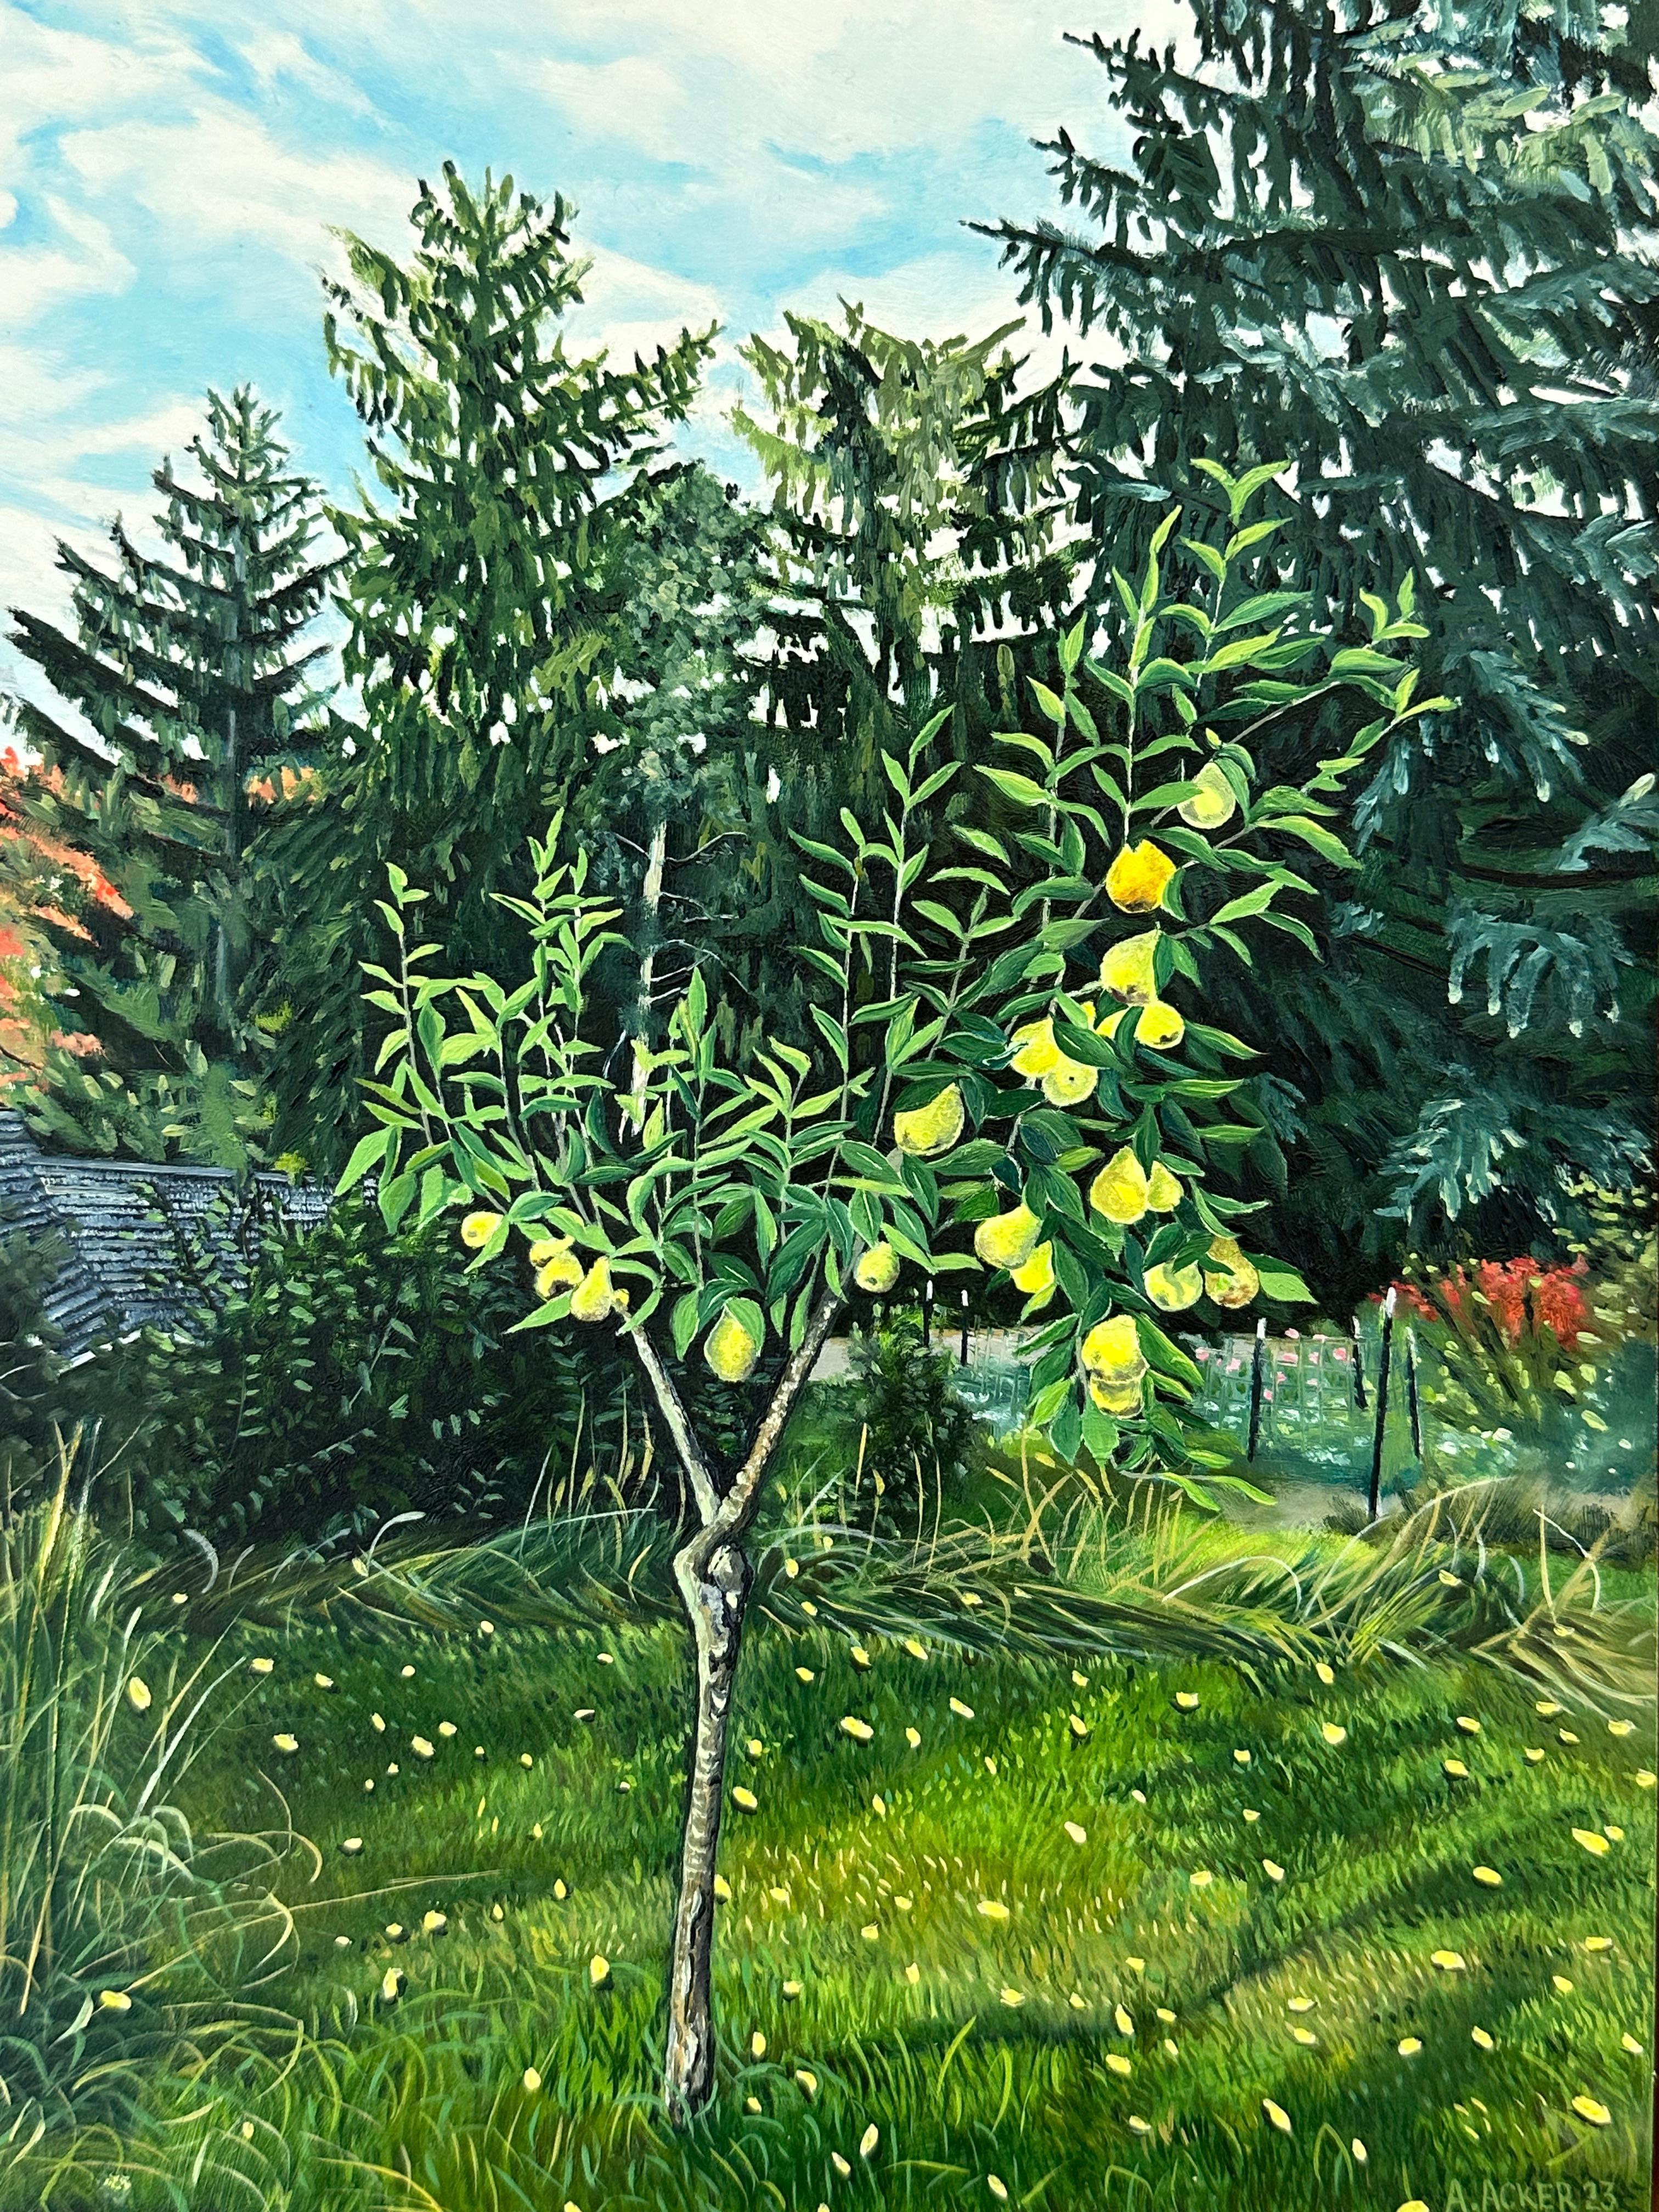 Yellow pears hang from a verdant fruit tree in a peaceful backyard surrounded by dark green pine trees beneath a calm blue sky with light wispy clouds, while yellow flowers spring up from the green grass in this idyllic garden scene. Signed and